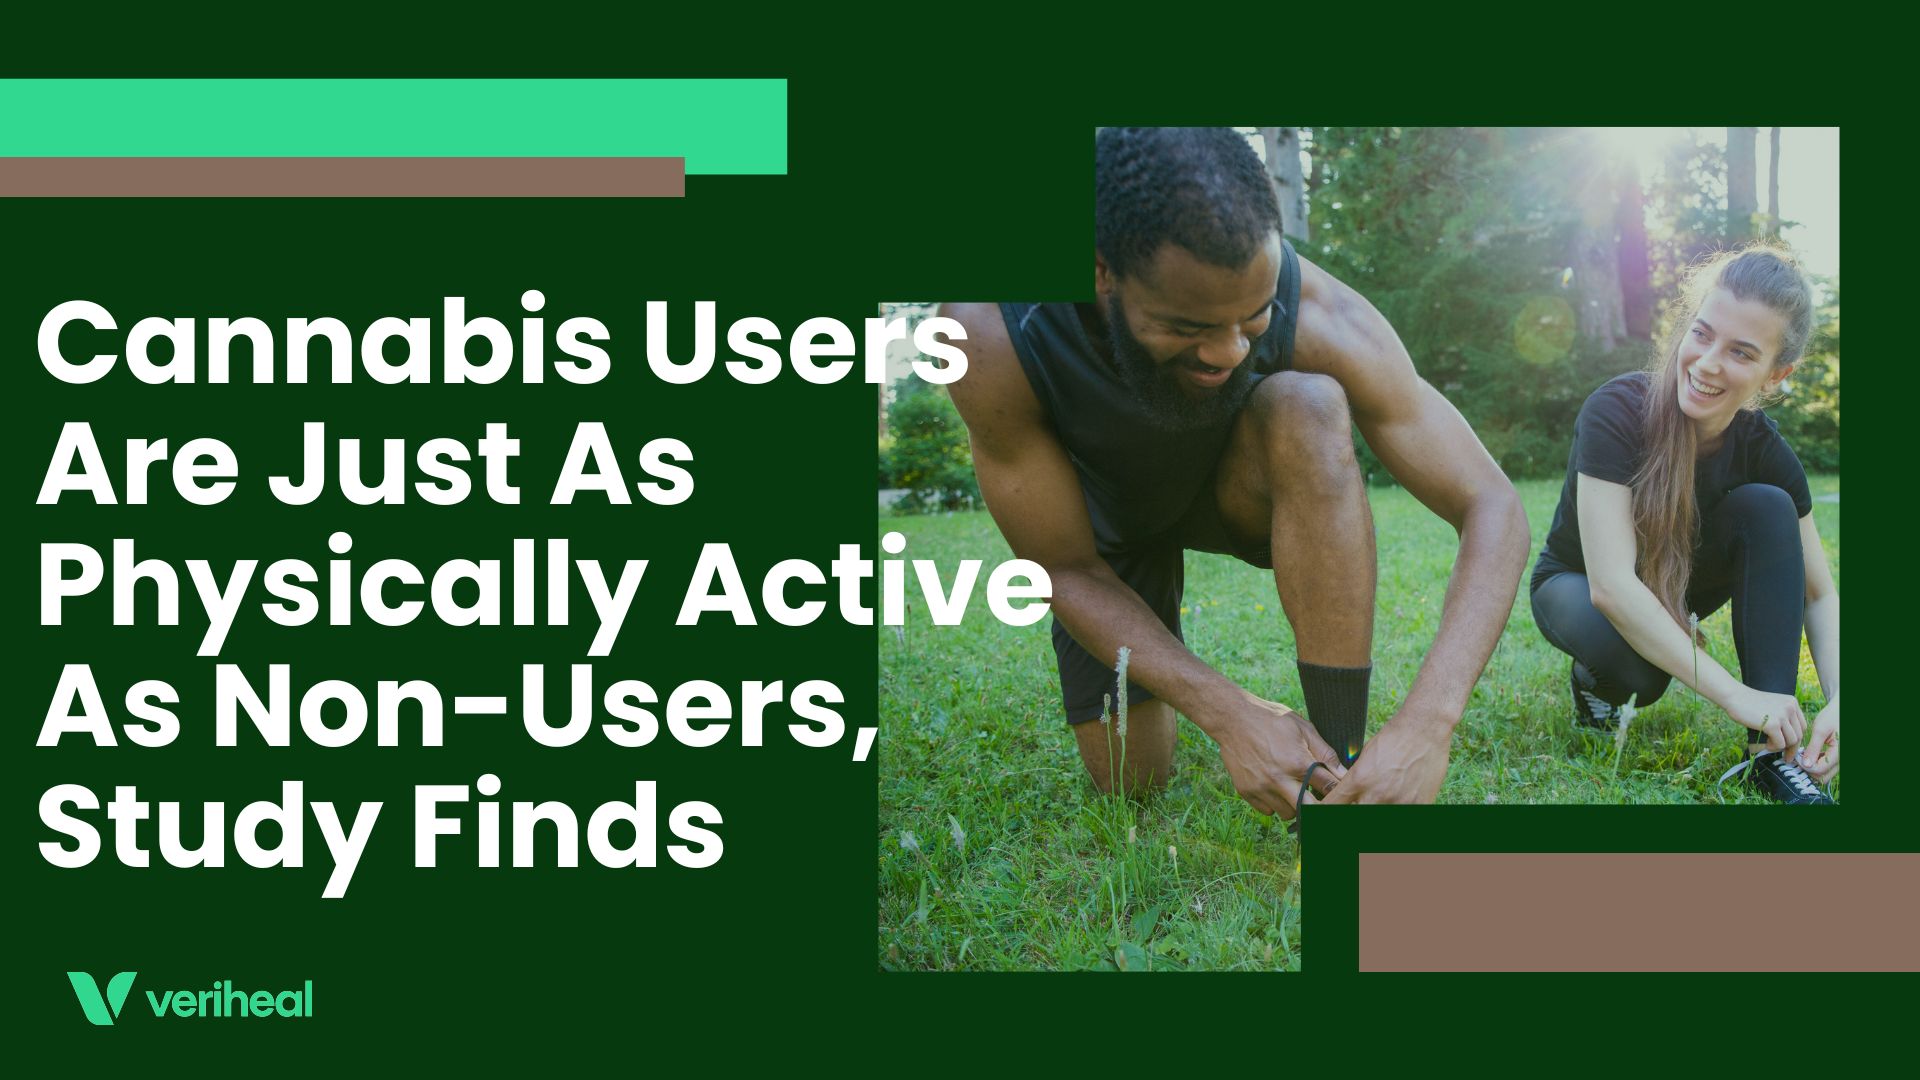 Cannabis Users Are Just As Physically Active As Non-Users, Study Finds